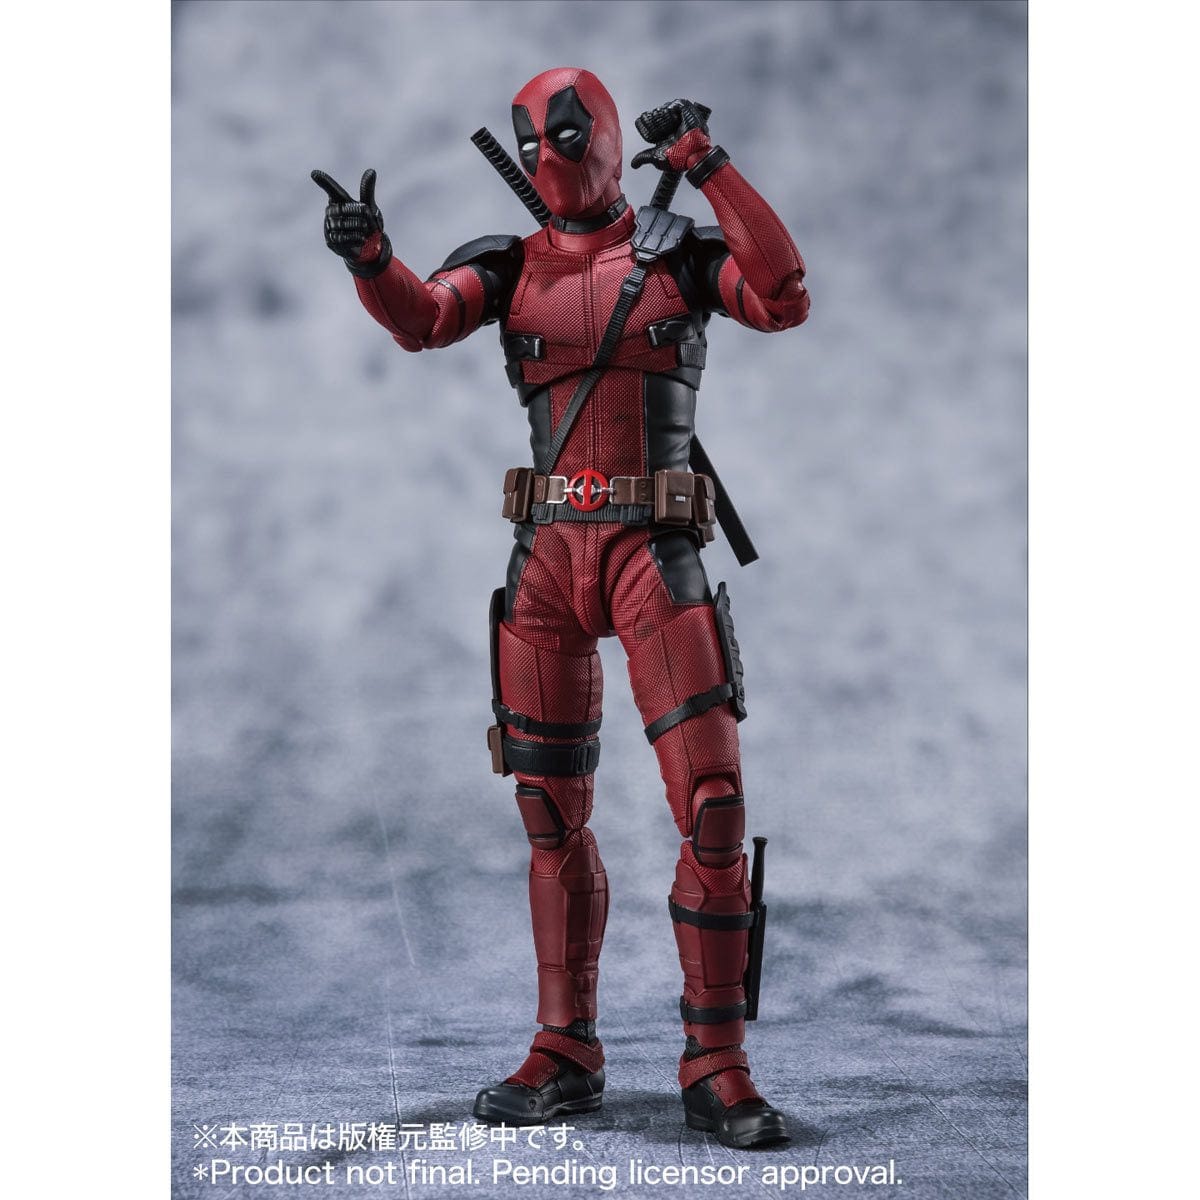 DEADPOOL Pointing pose